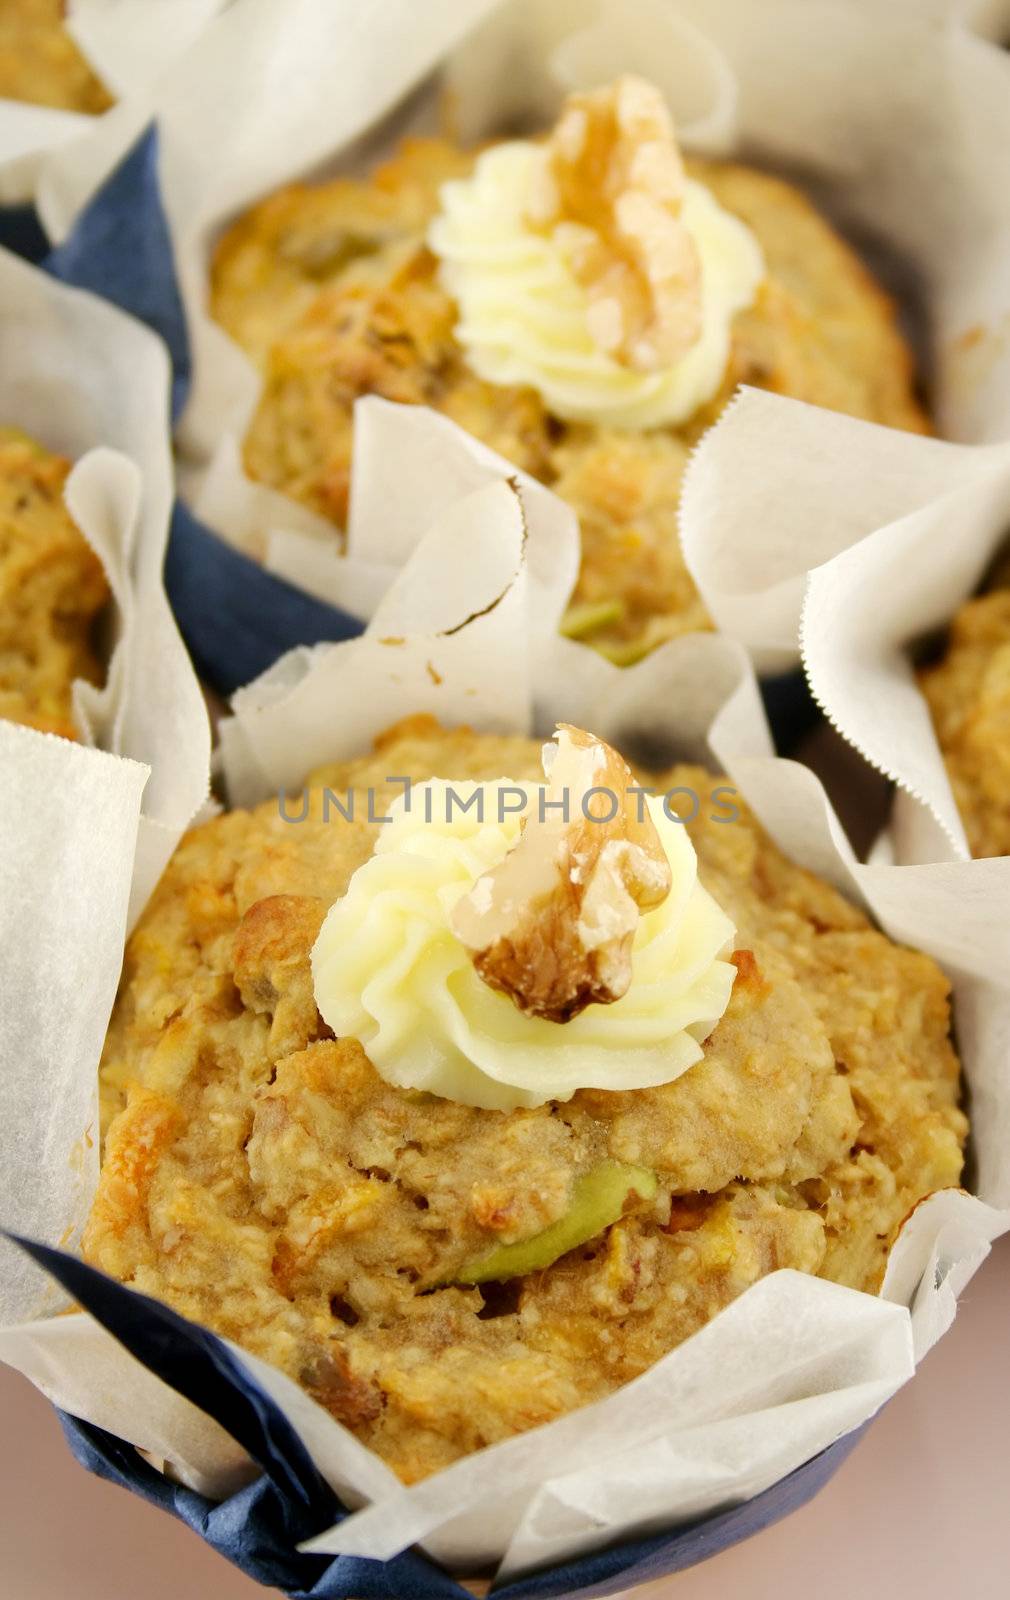 Homestyle fresh baked fruit muffins with cream cheese and walnuts.